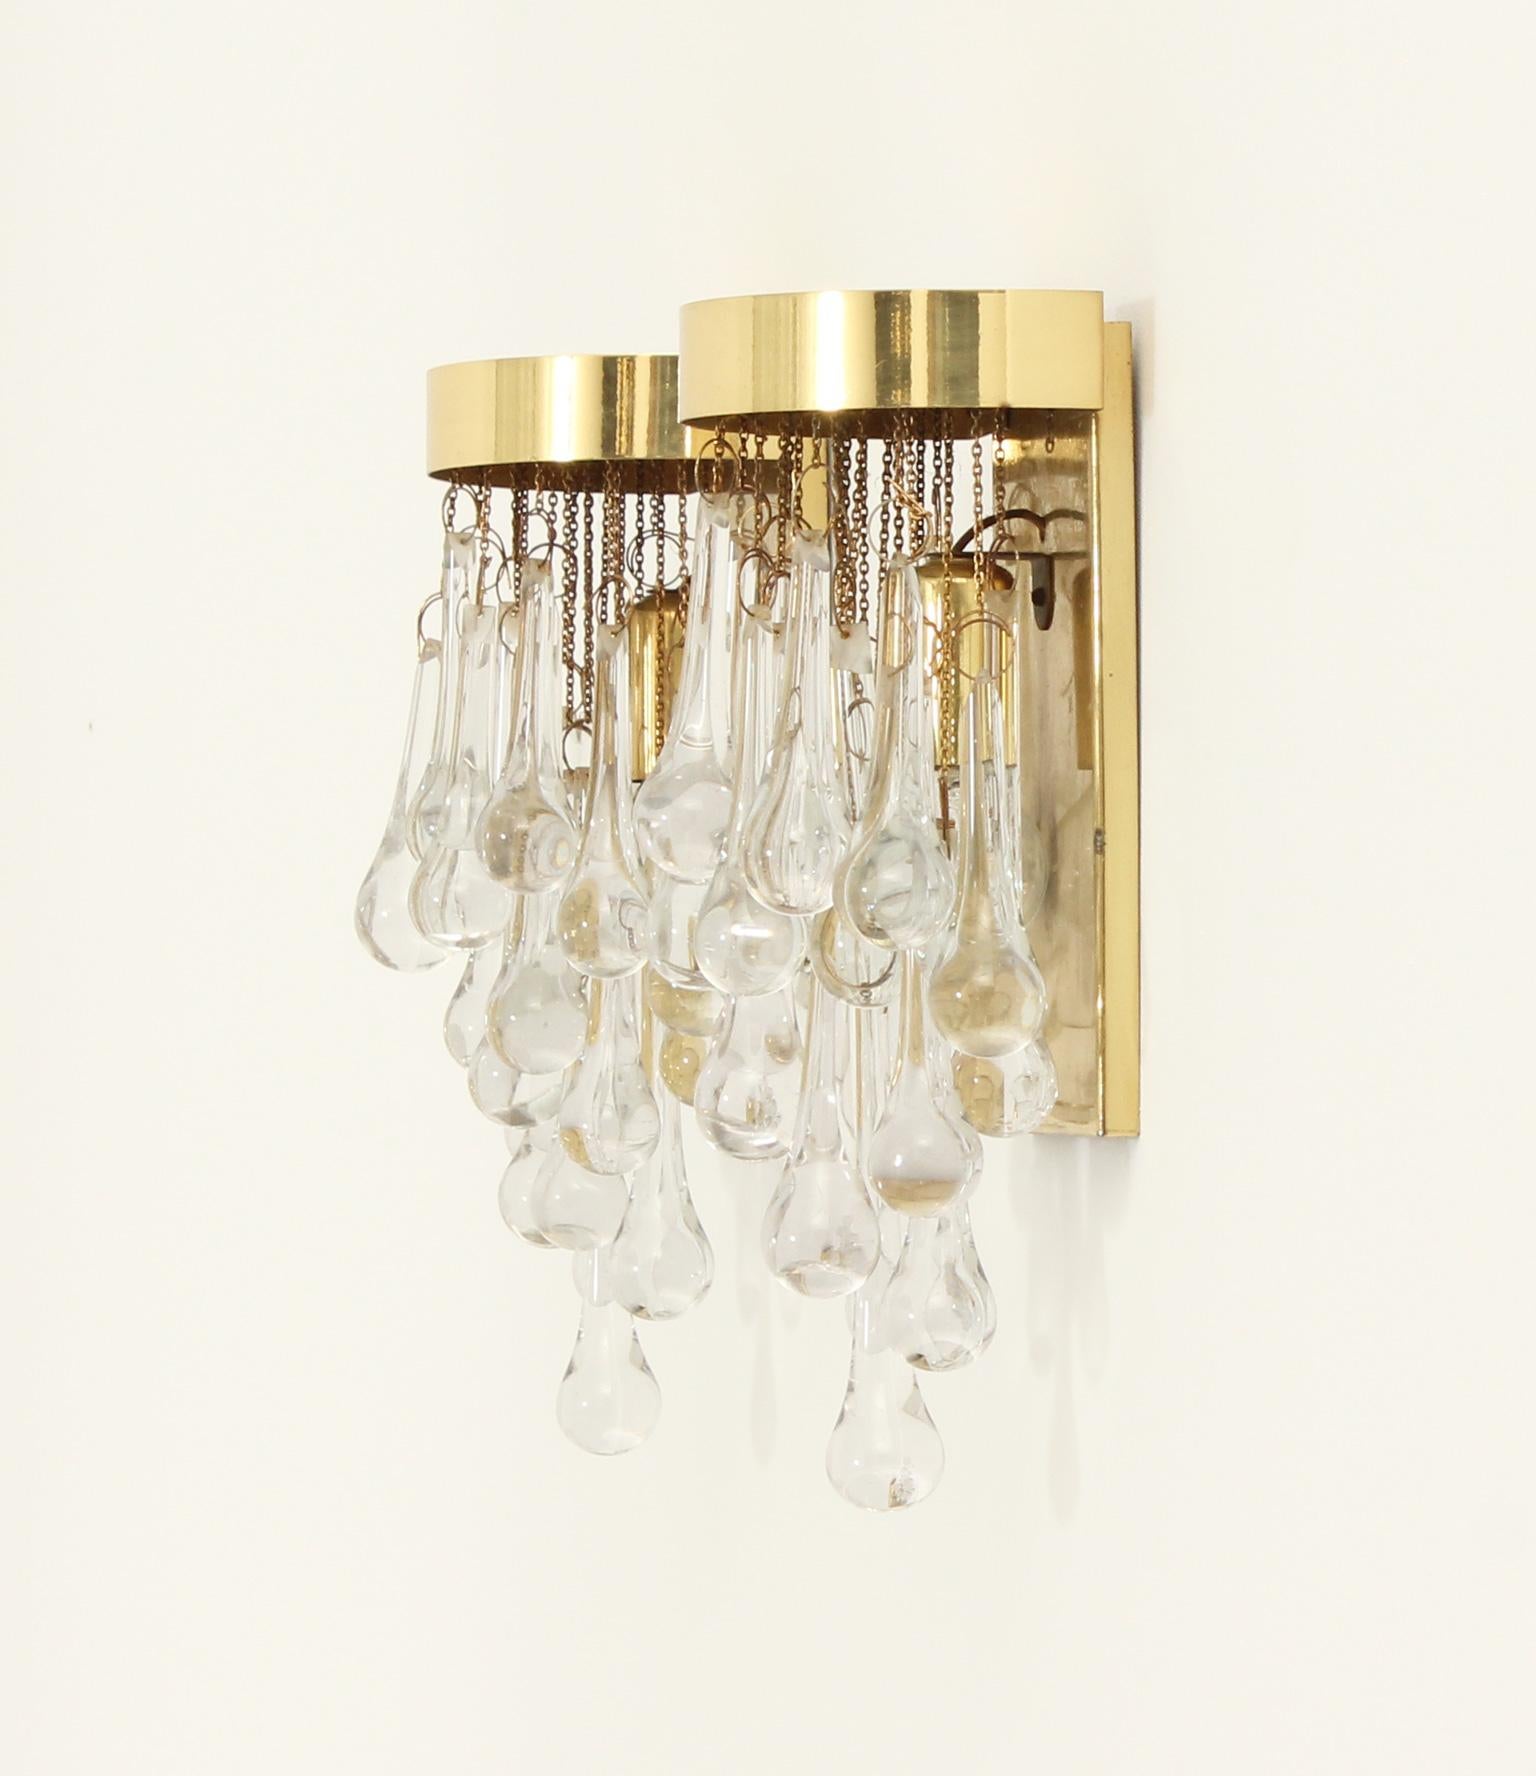 Late 20th Century Pair of Brass and Glass Teardrop Sconces by Lumica, Spain, 1970's